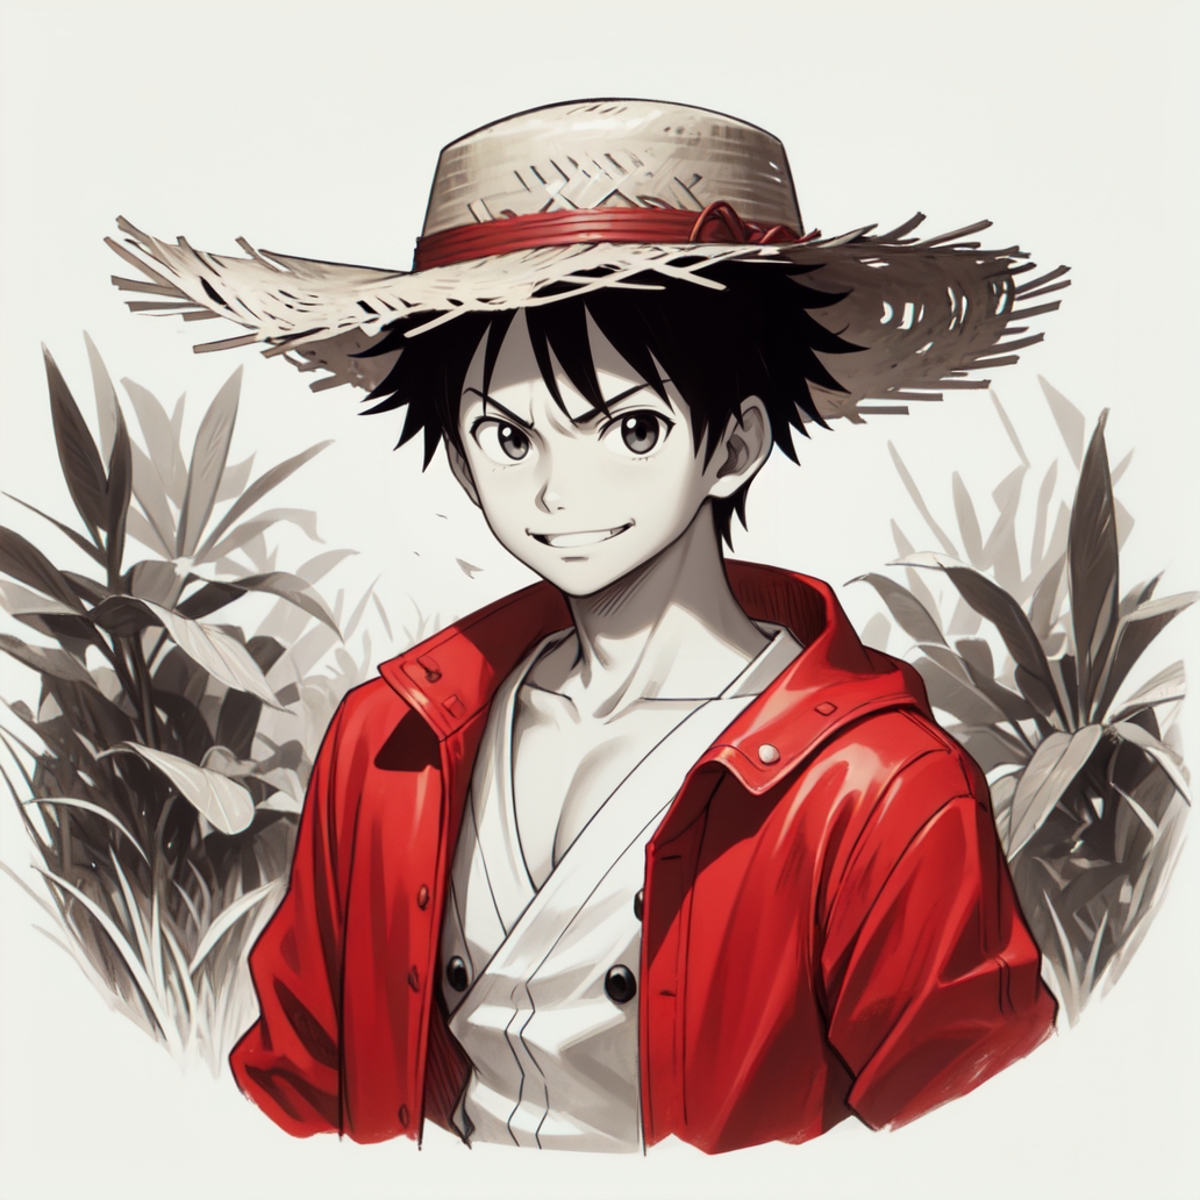 A cartoon character wearing a red coat and straw hat.